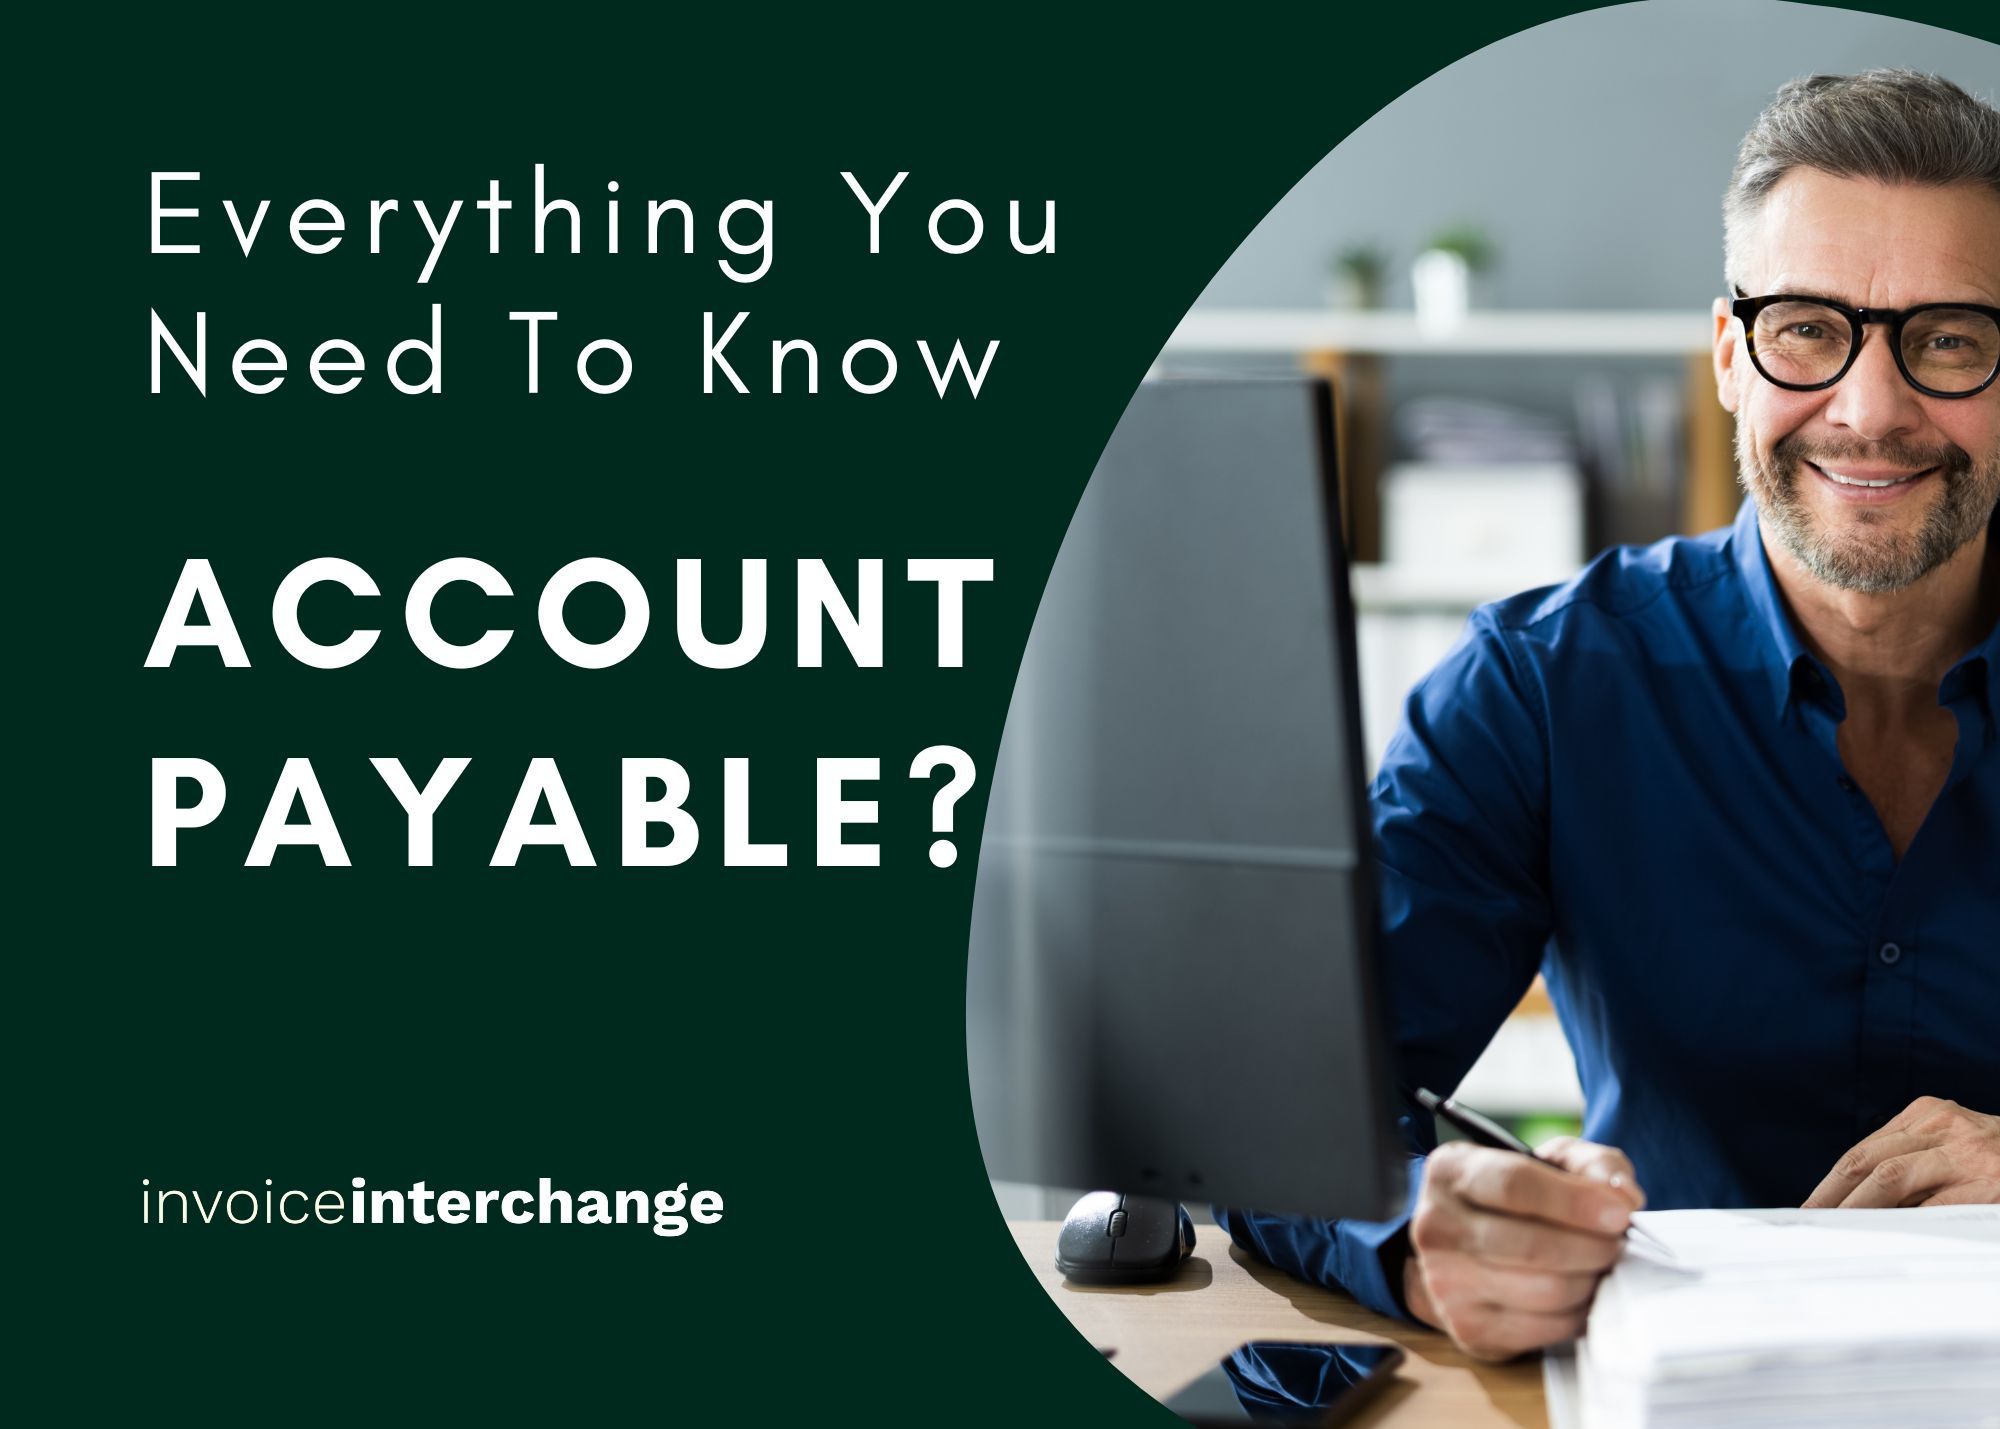 Accounts Payable - Everything You Need to Know